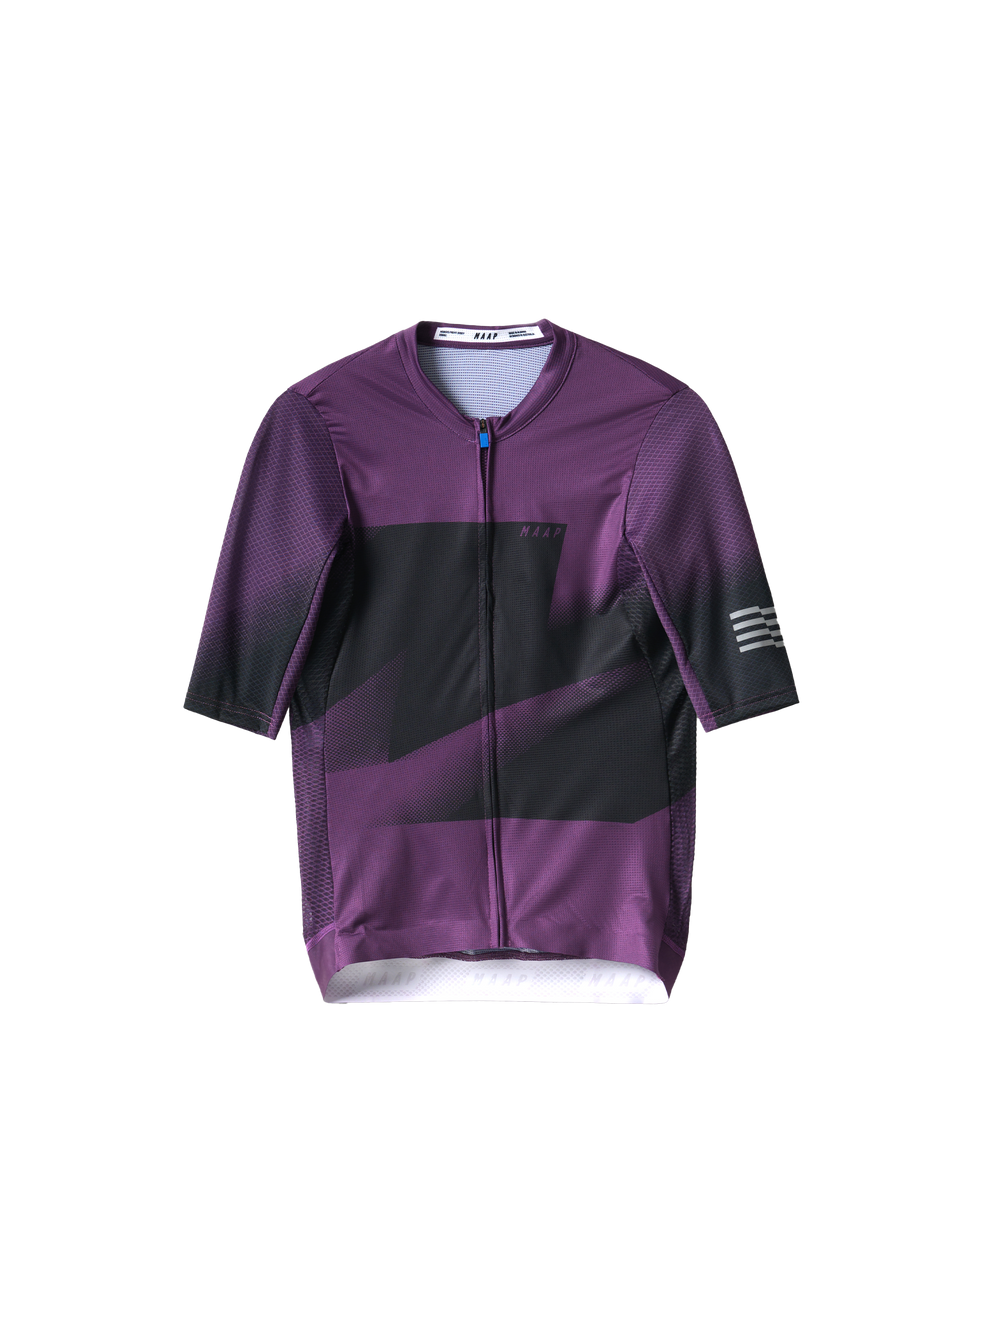 Product Image for Women's Evolve Pro Air Jersey 2.0